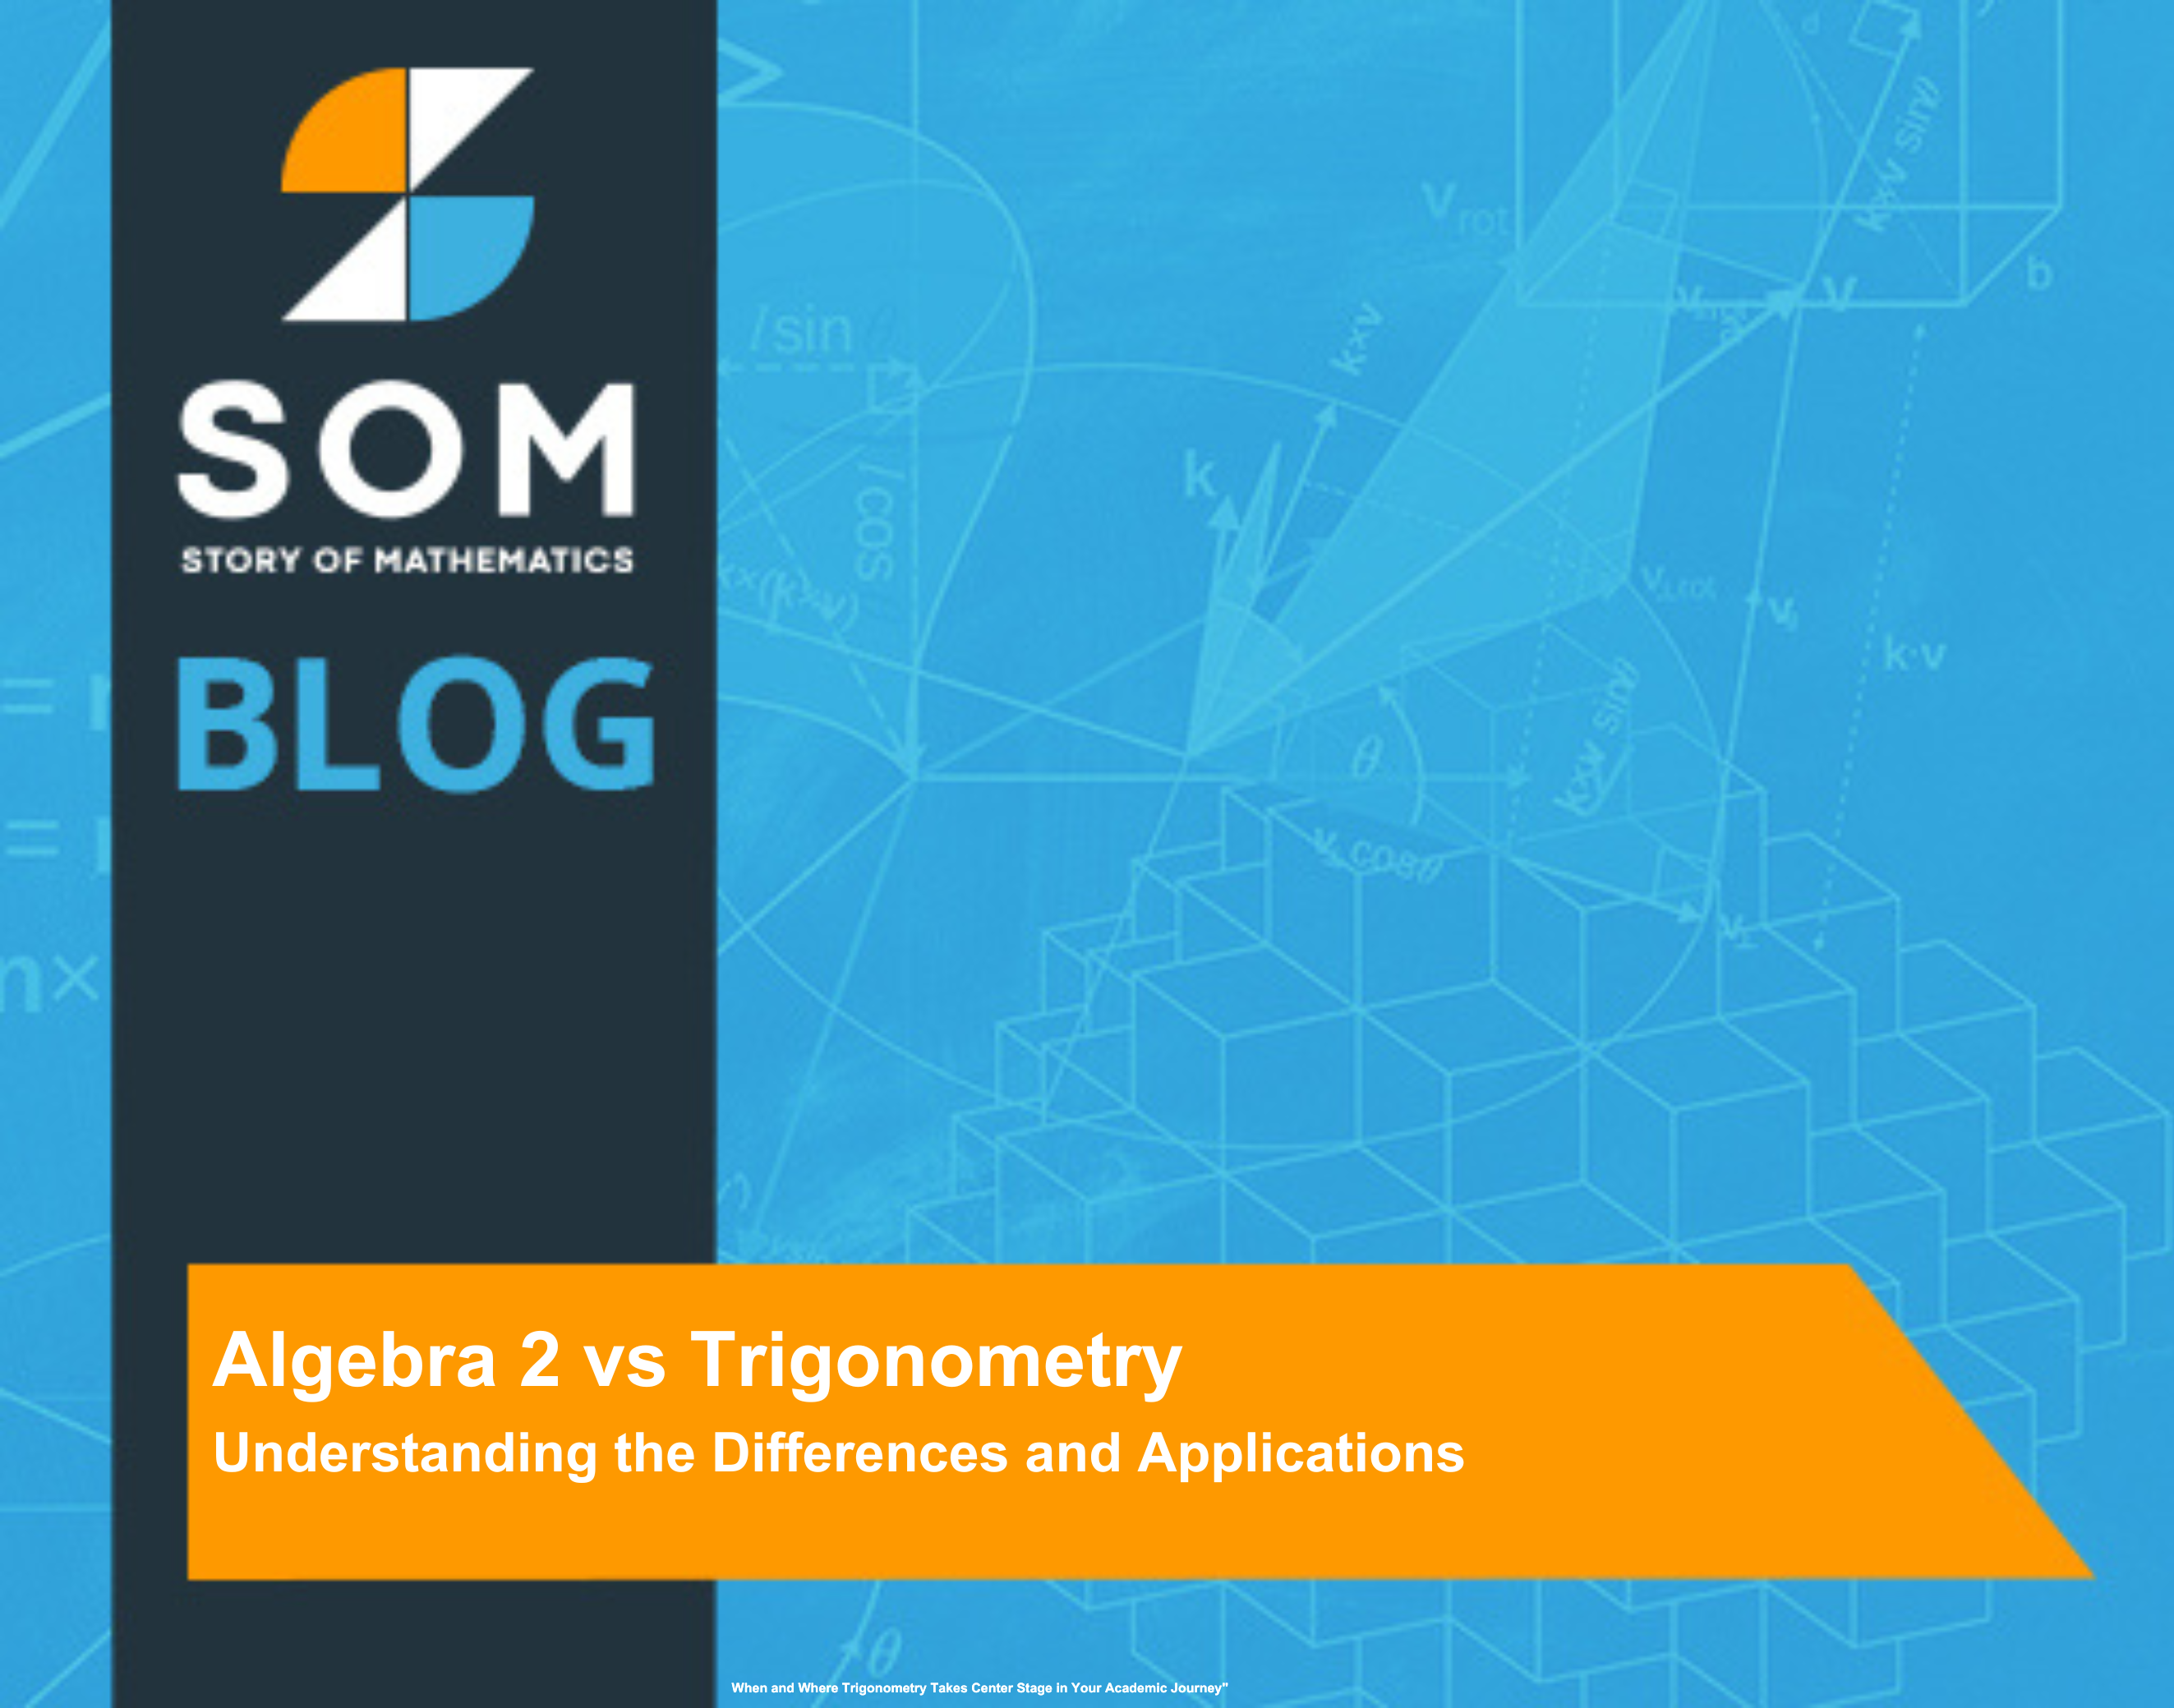 Feature Image Algebra 2 vs Trigonometry Understanding the Differences and Applications